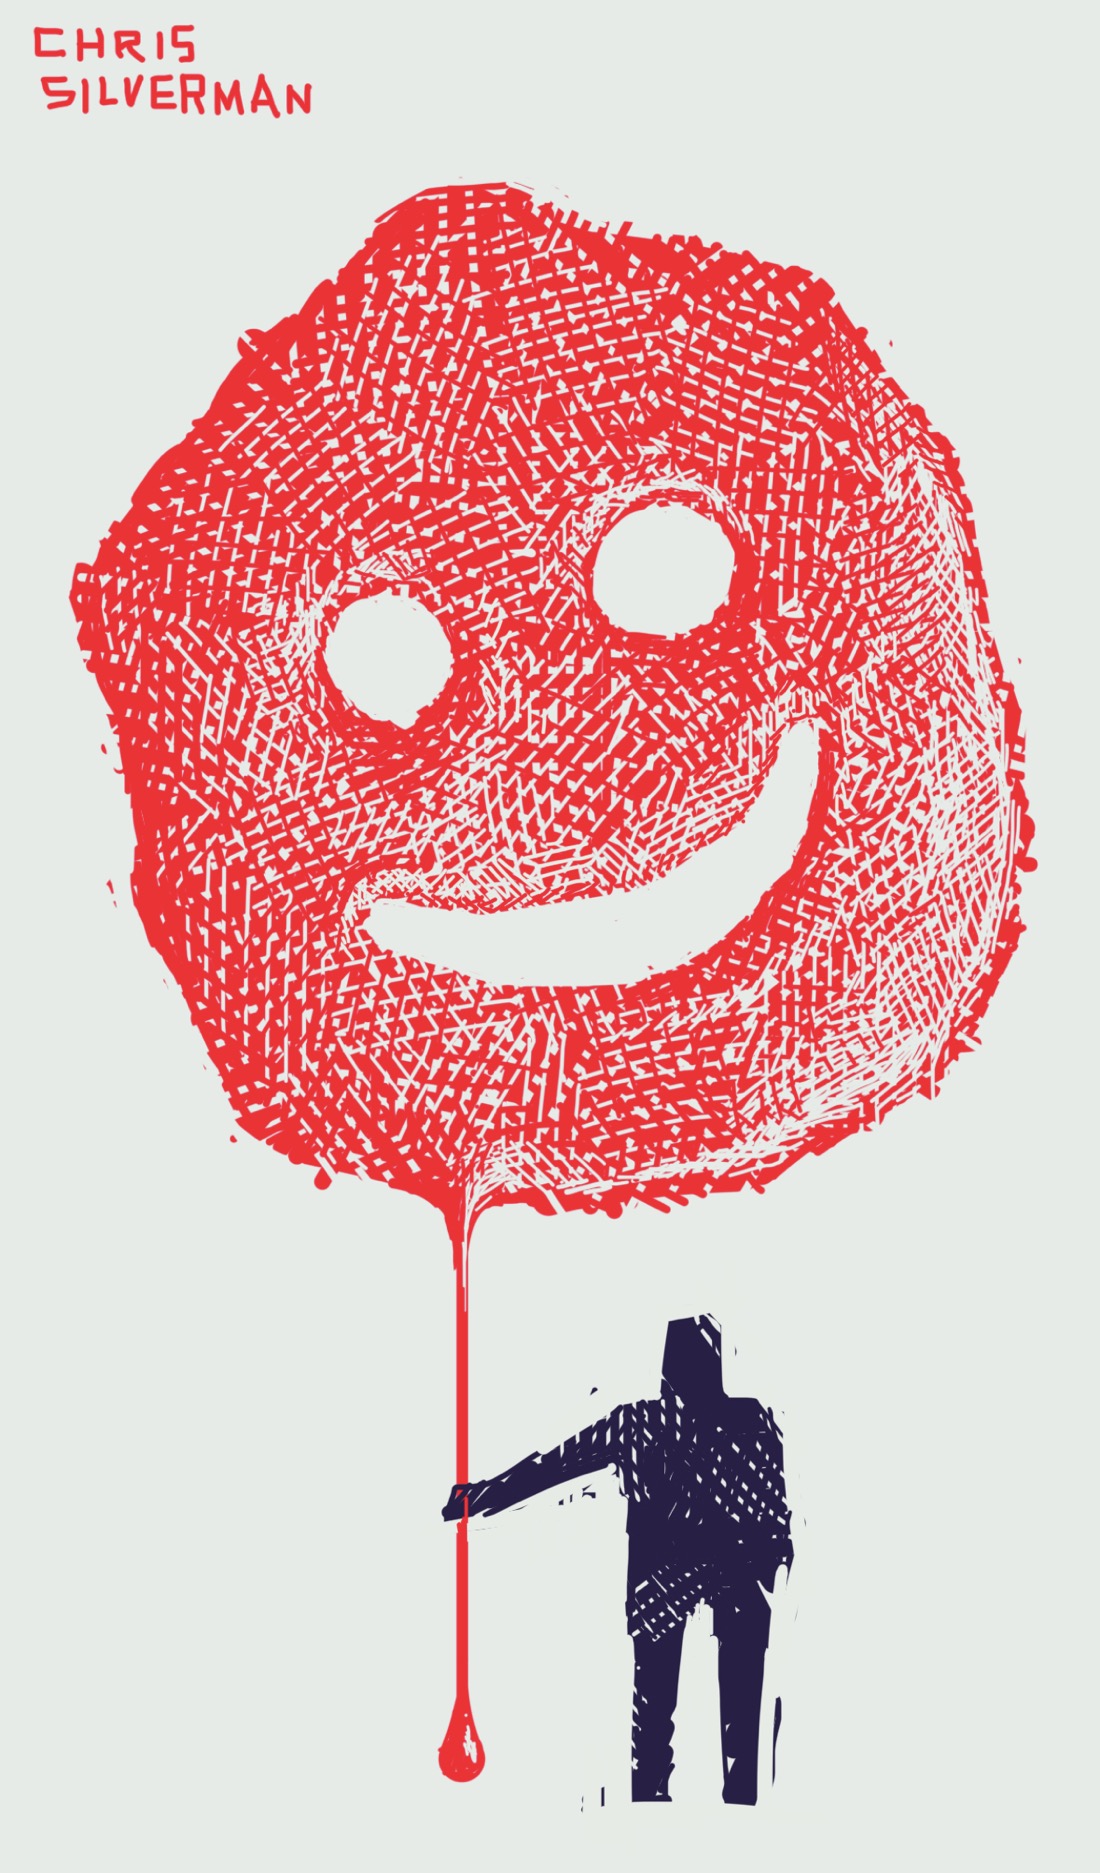 A large, blobby, red smiley-face that seems to be made of candy, melted plastic, or some sticky substance. The smiley-face looks like it is suspended in the air; dangling from it is a long drippy strand. Standing below the face is a small person, holding the strand as though it's a balloon string. The face is much bigger than the person, and looks like it's the size of a weather balloon in comparison. The background of the drawing is light gray, and the person is midnight blue.